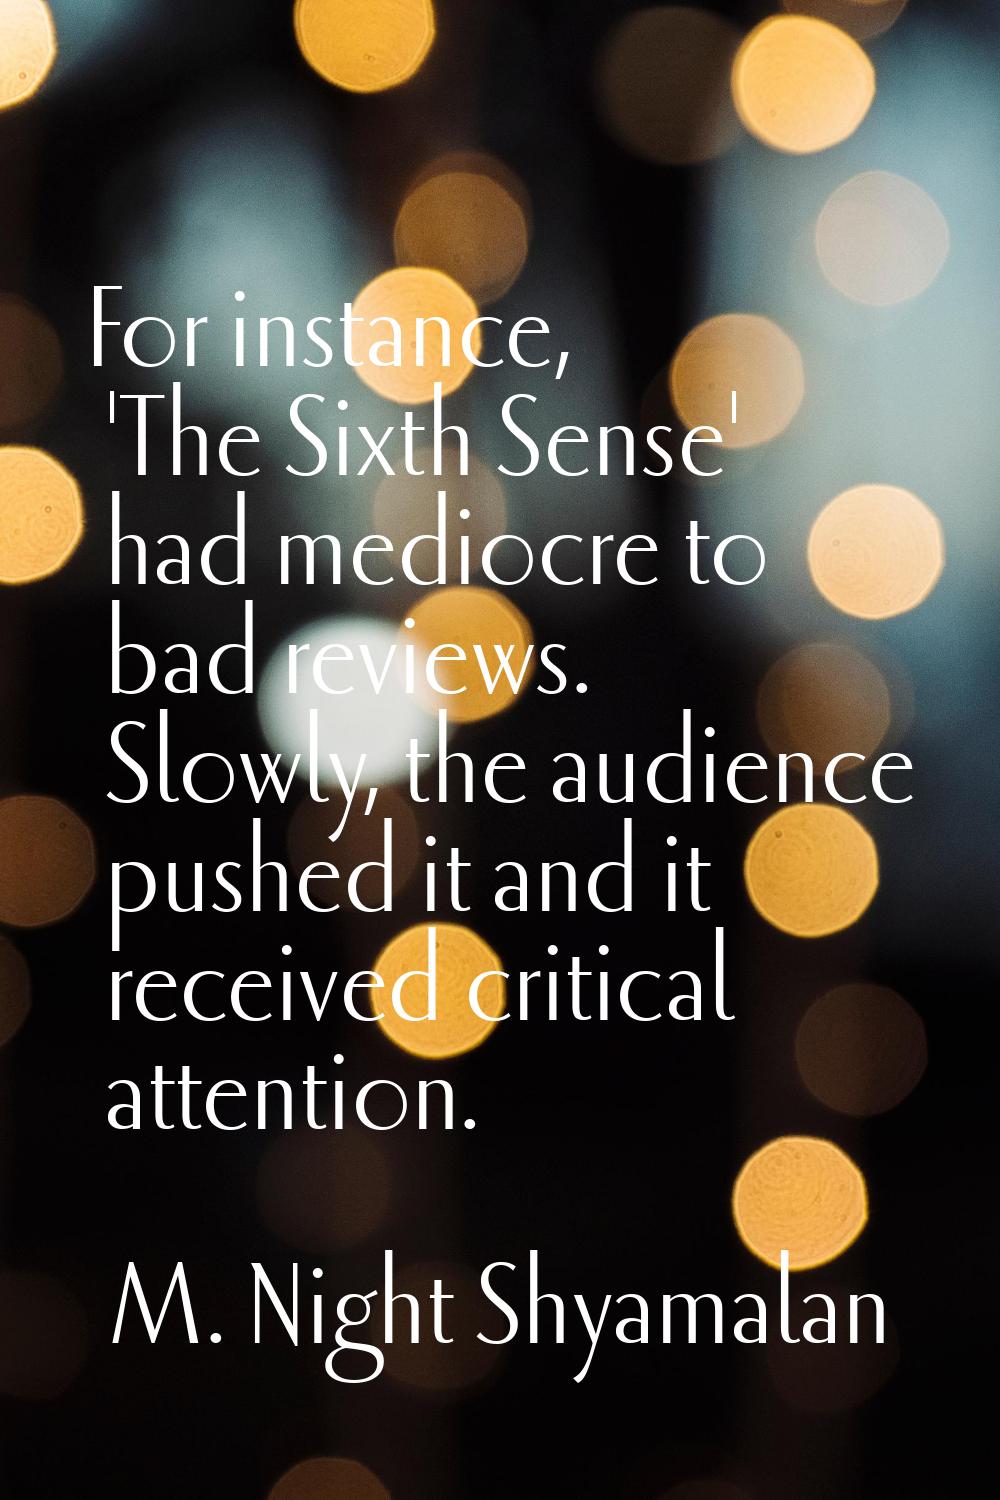 For instance, 'The Sixth Sense' had mediocre to bad reviews. Slowly, the audience pushed it and it 